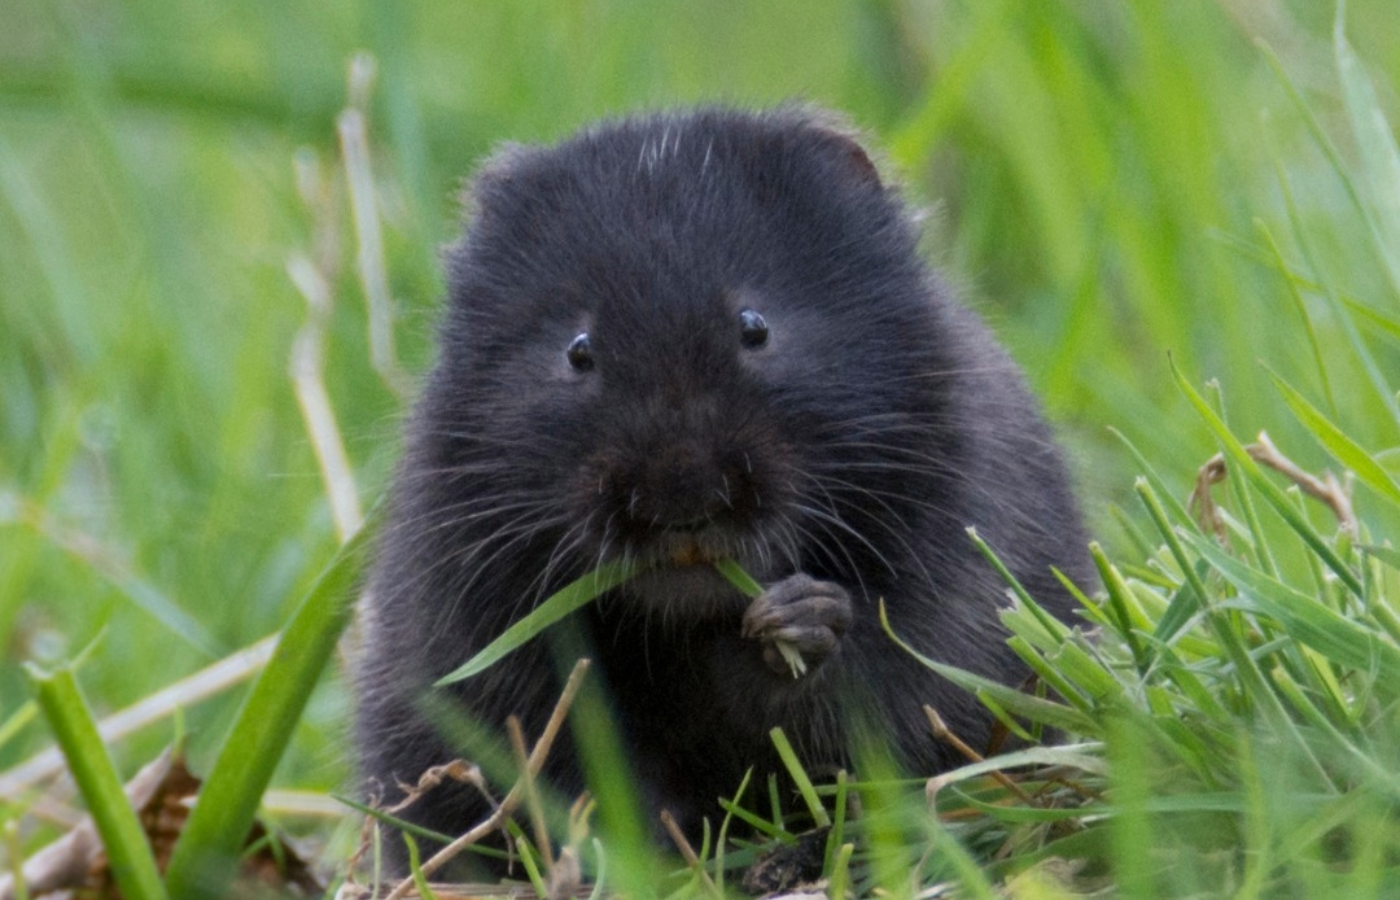 Water voles could flourish in habitat created by beavers in Argyll & Bute